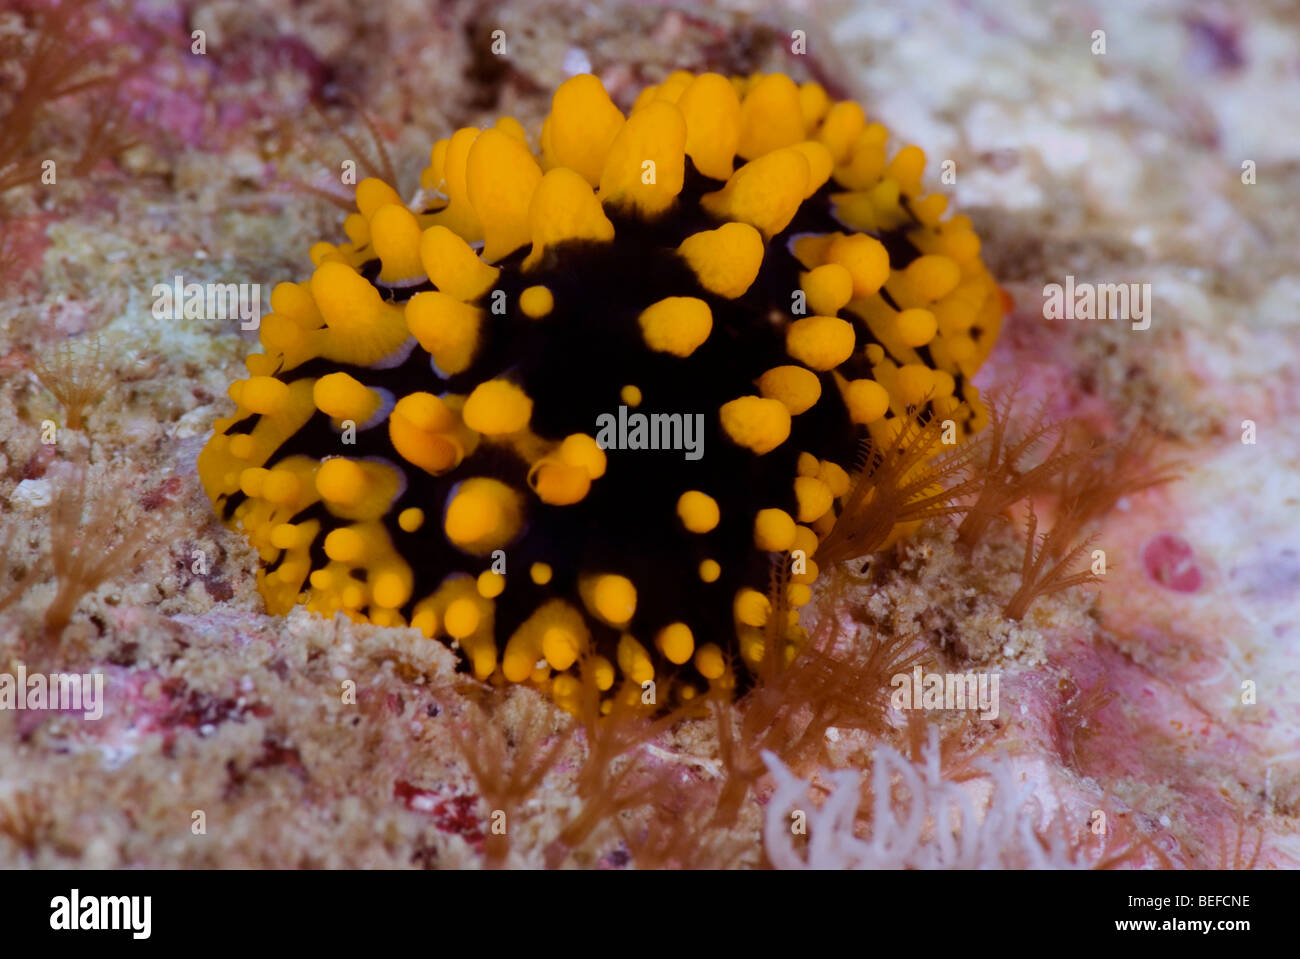 Black Nudibranch with yellow warts under water. Stock Photo